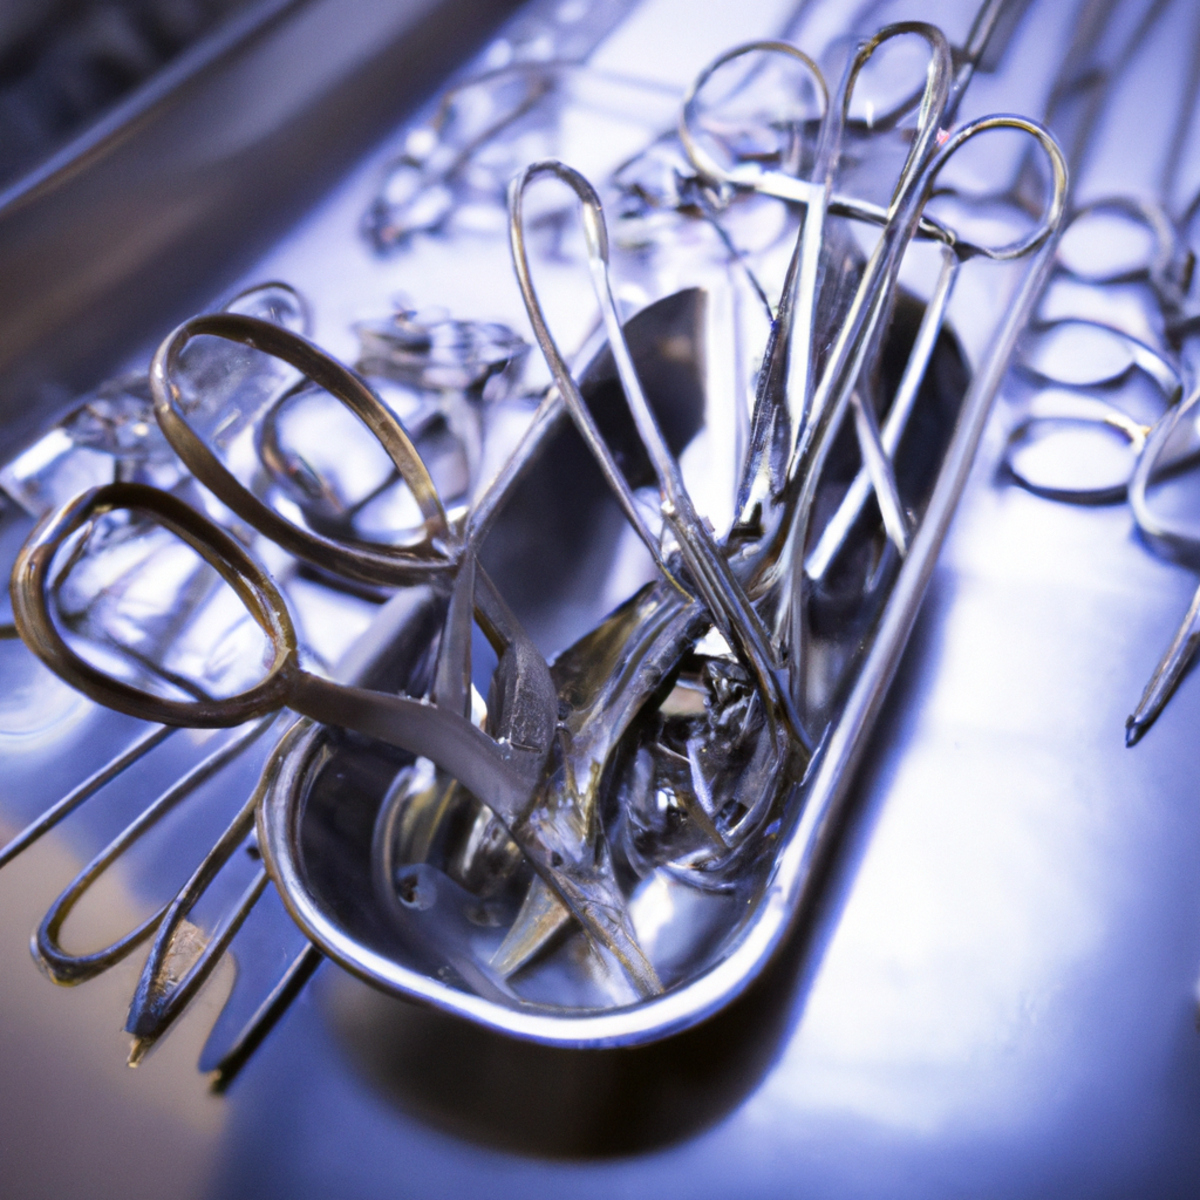 Close-up view of surgical instrument tray with stainless steel tools used in gallbladder surgeries. Gallbladder model held by forceps showcases intricate structure.